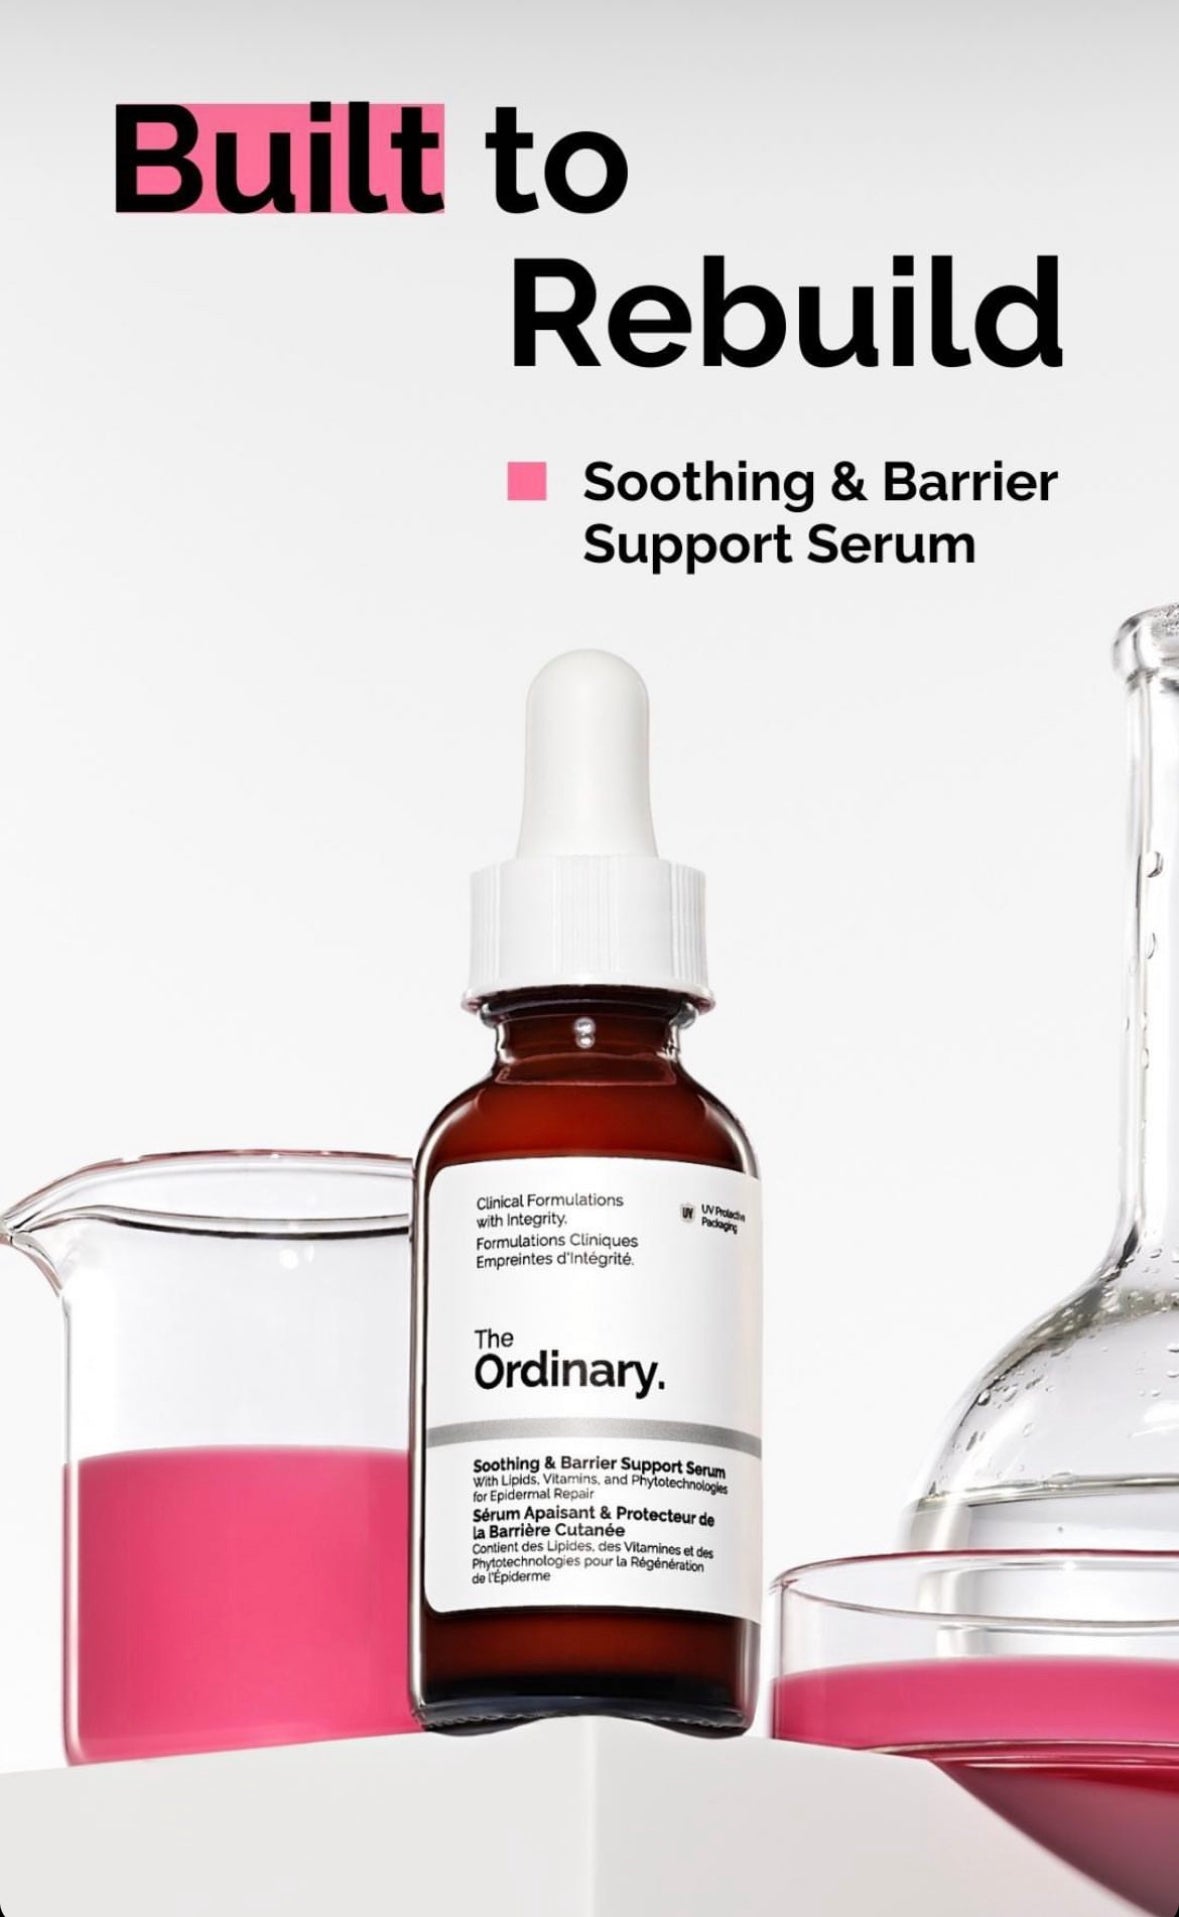 THE ORDINARY Soothing & Barrier Support Serum